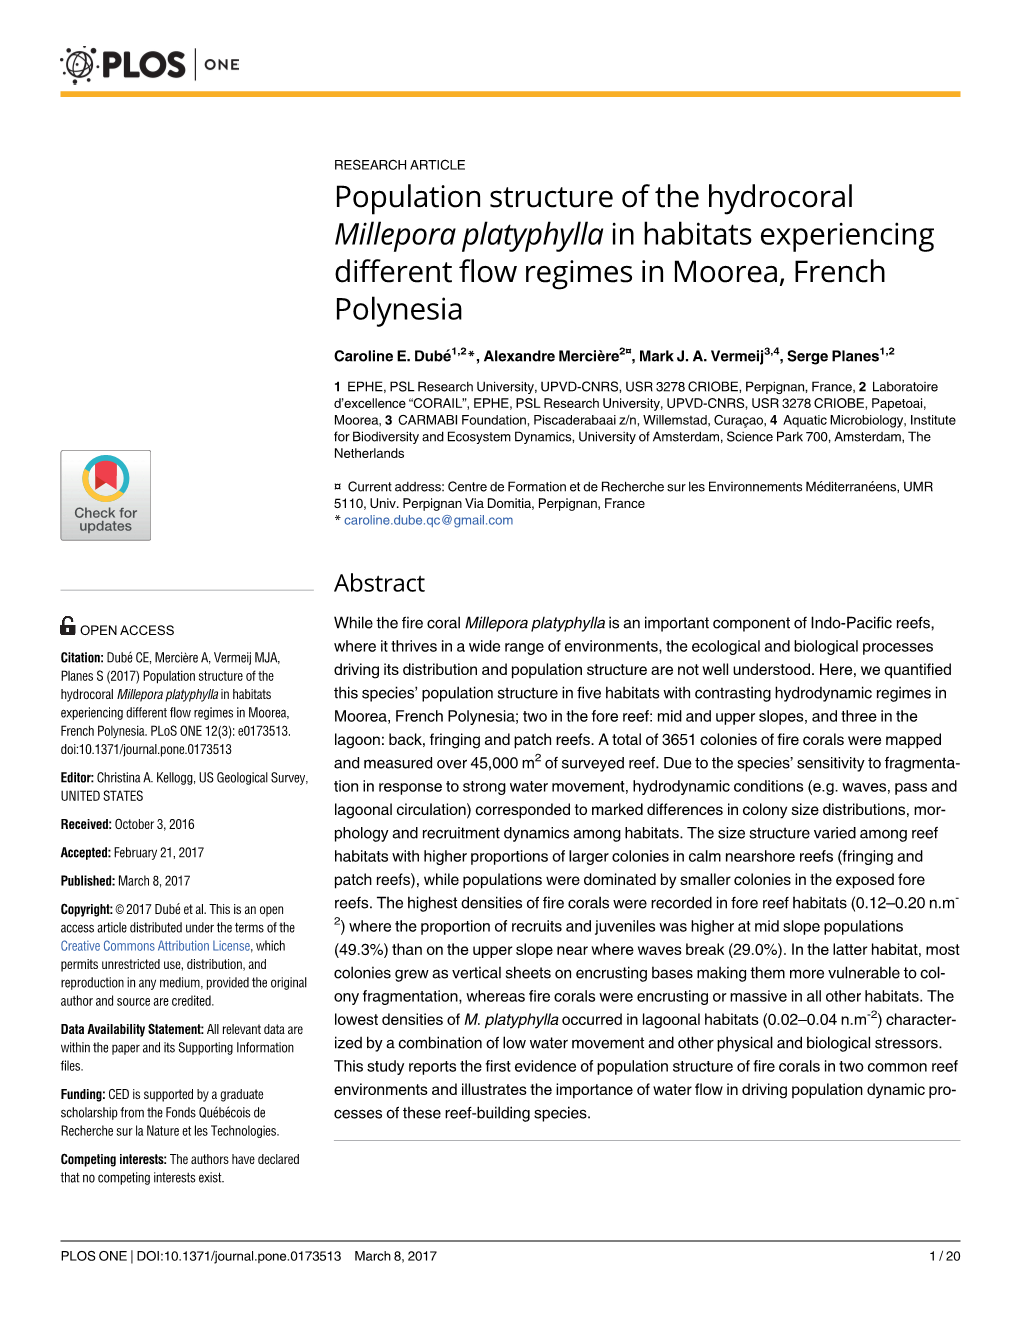 Population Structure of the Hydrocoral Millepora Platyphylla in Habitats Experiencing Different Flow Regimes in Moorea, French Polynesia